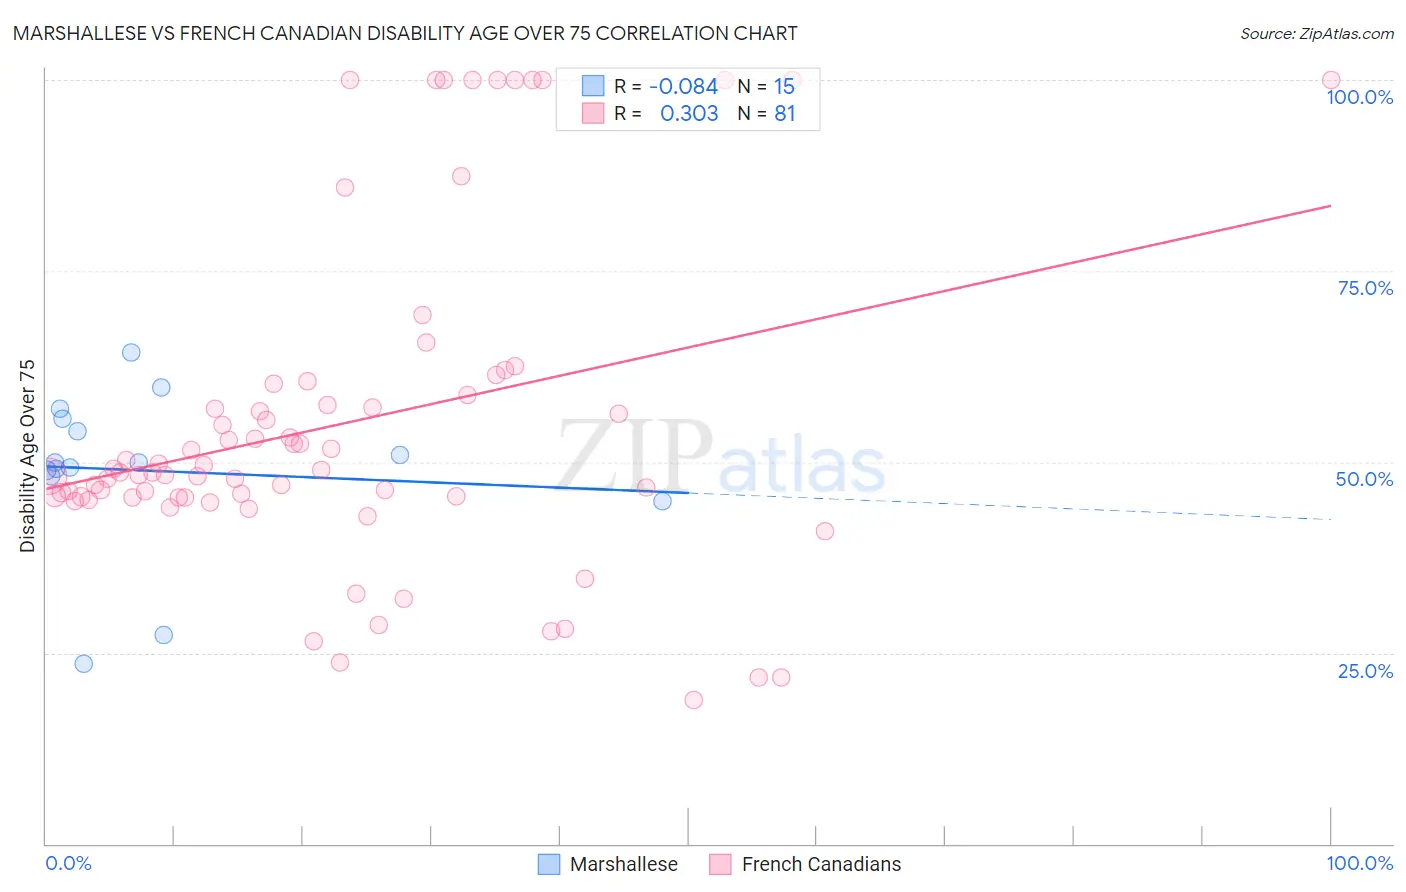 Marshallese vs French Canadian Disability Age Over 75